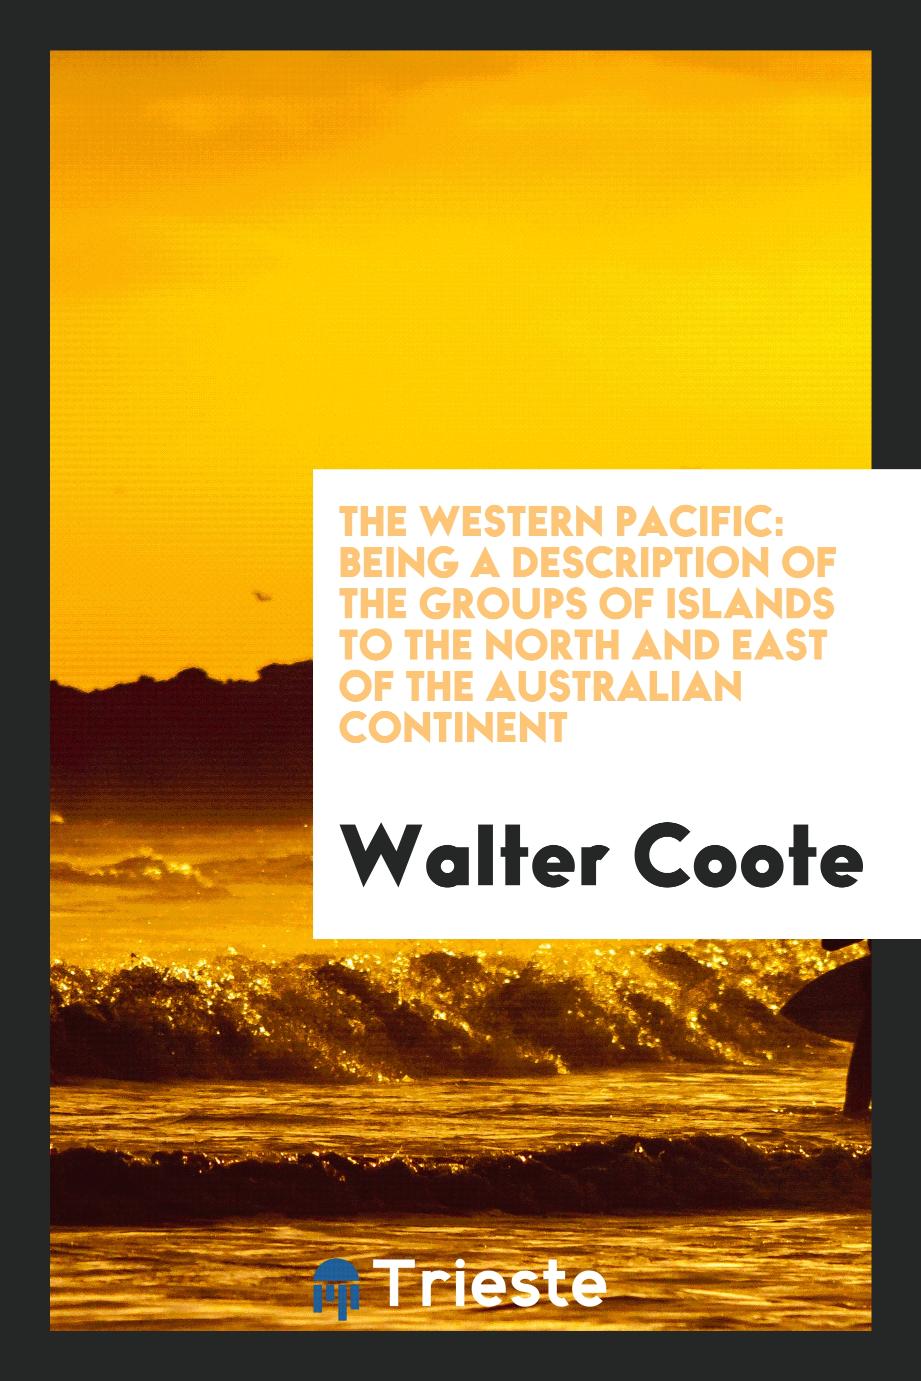 The western Pacific: being a description of the groups of islands to the north and east of the Australian continent